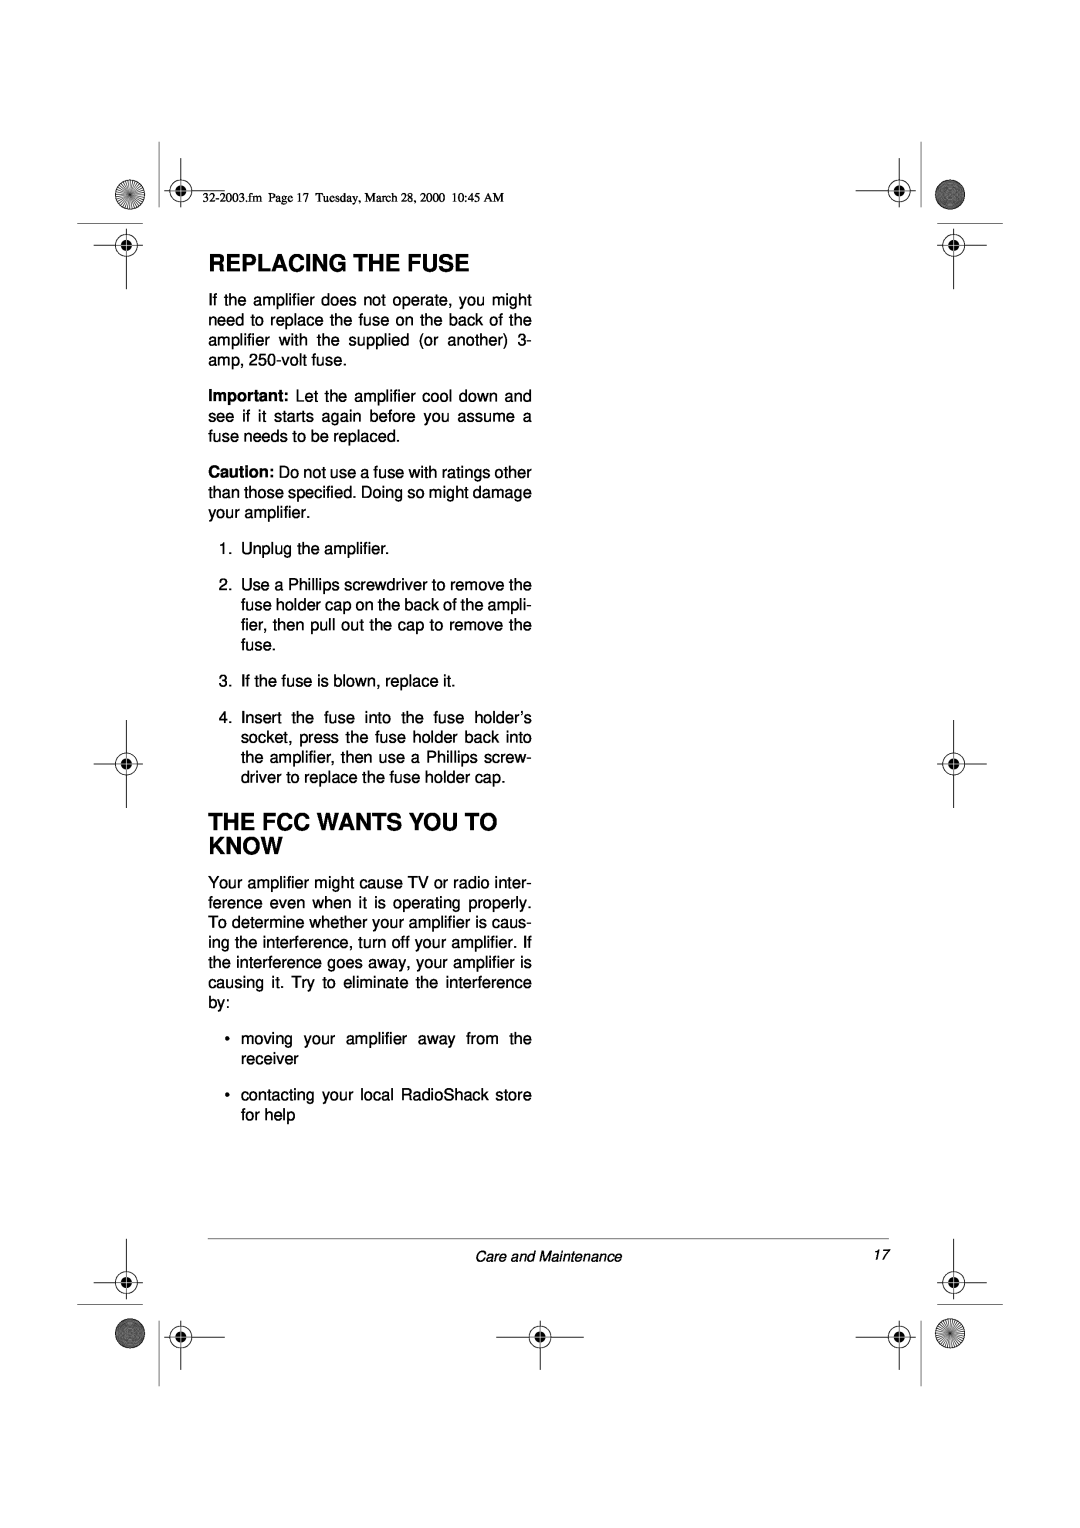 Radio Shack MPA-125 owner manual Replacing The Fuse, The Fcc Wants You To Know 